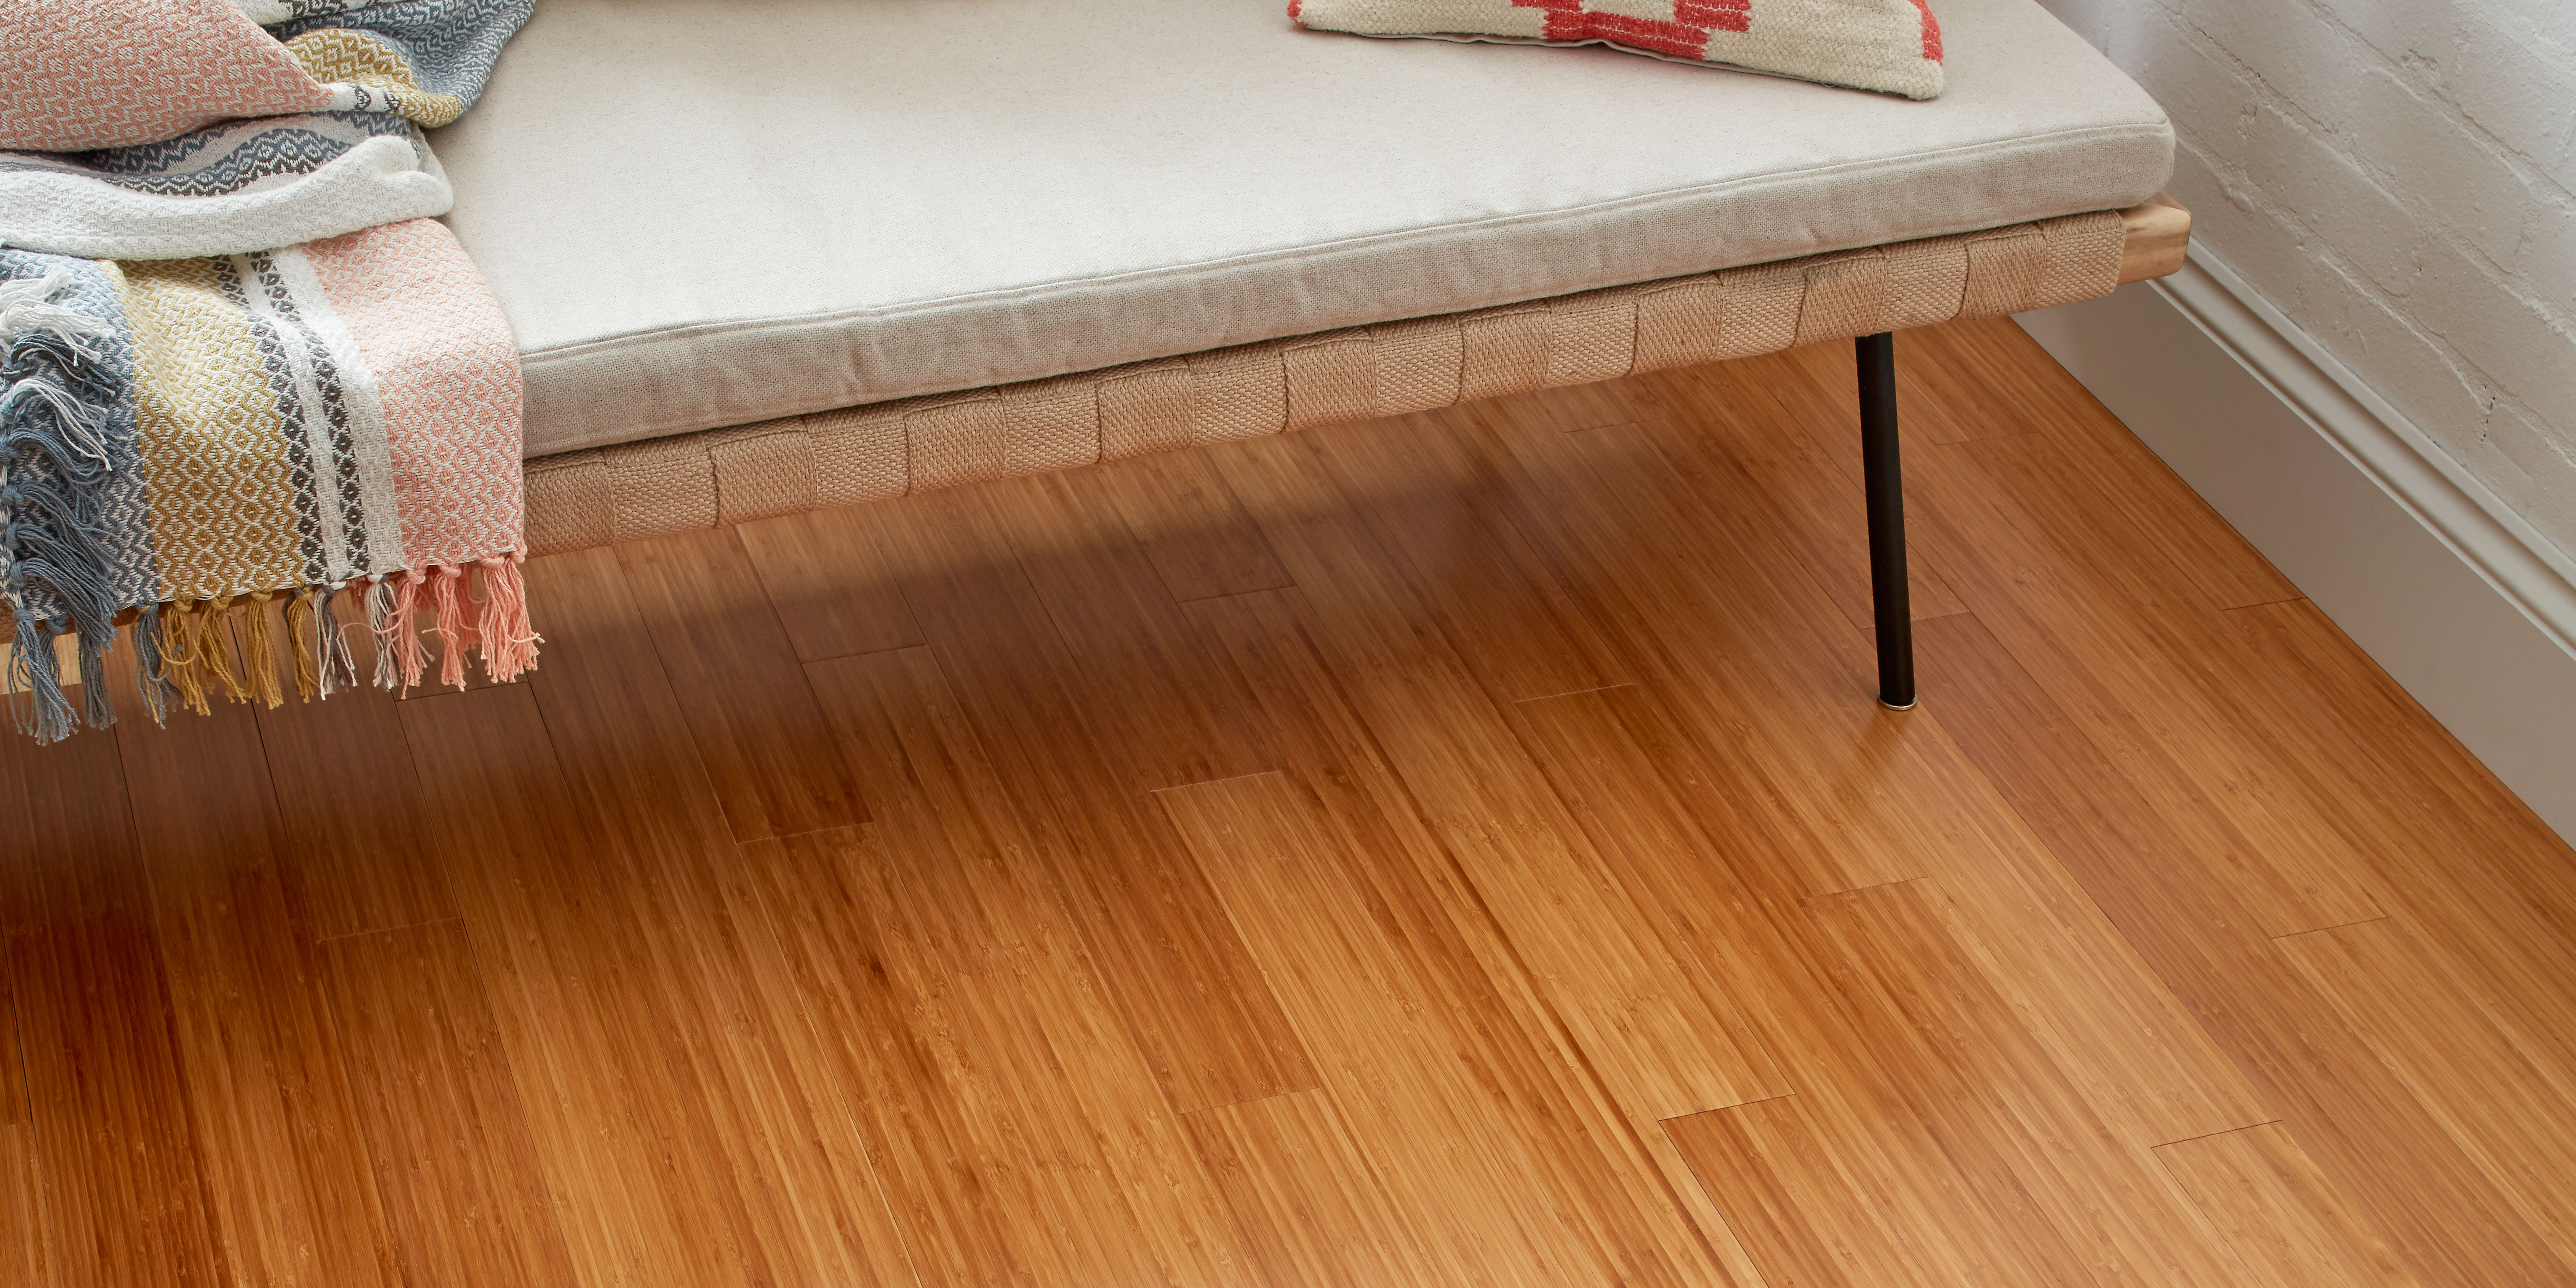 Bamboo Flooring Our Handy Guide Woodpecker Flooring Professional